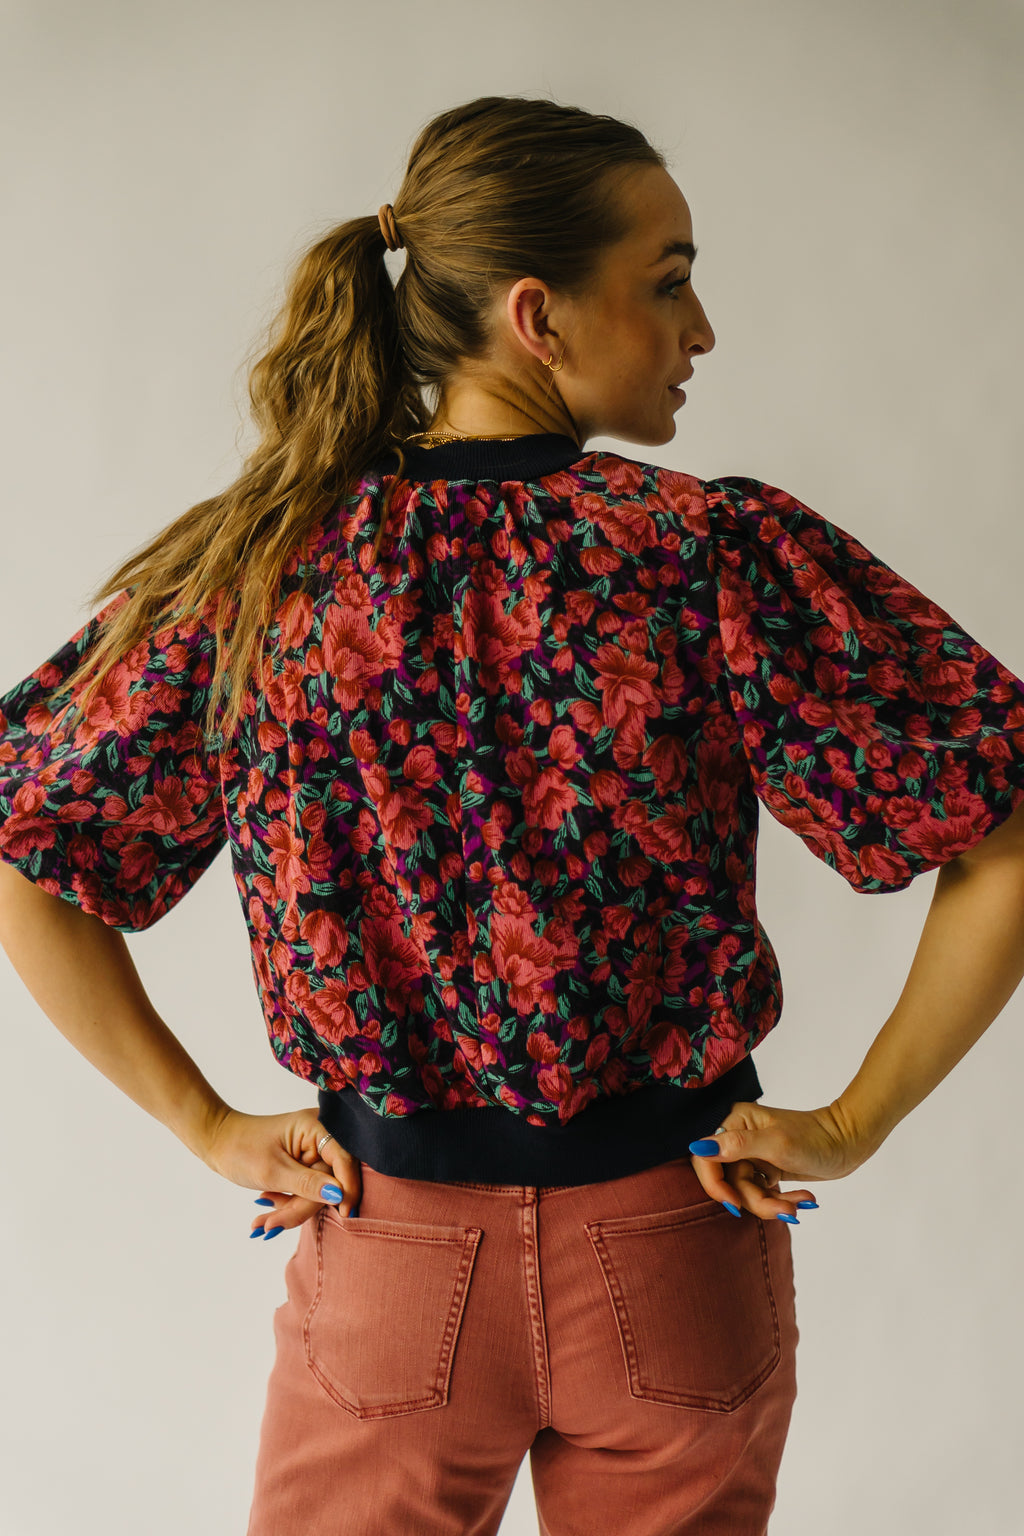 Piper & Scoot Tops | Boutique Clothing for Women